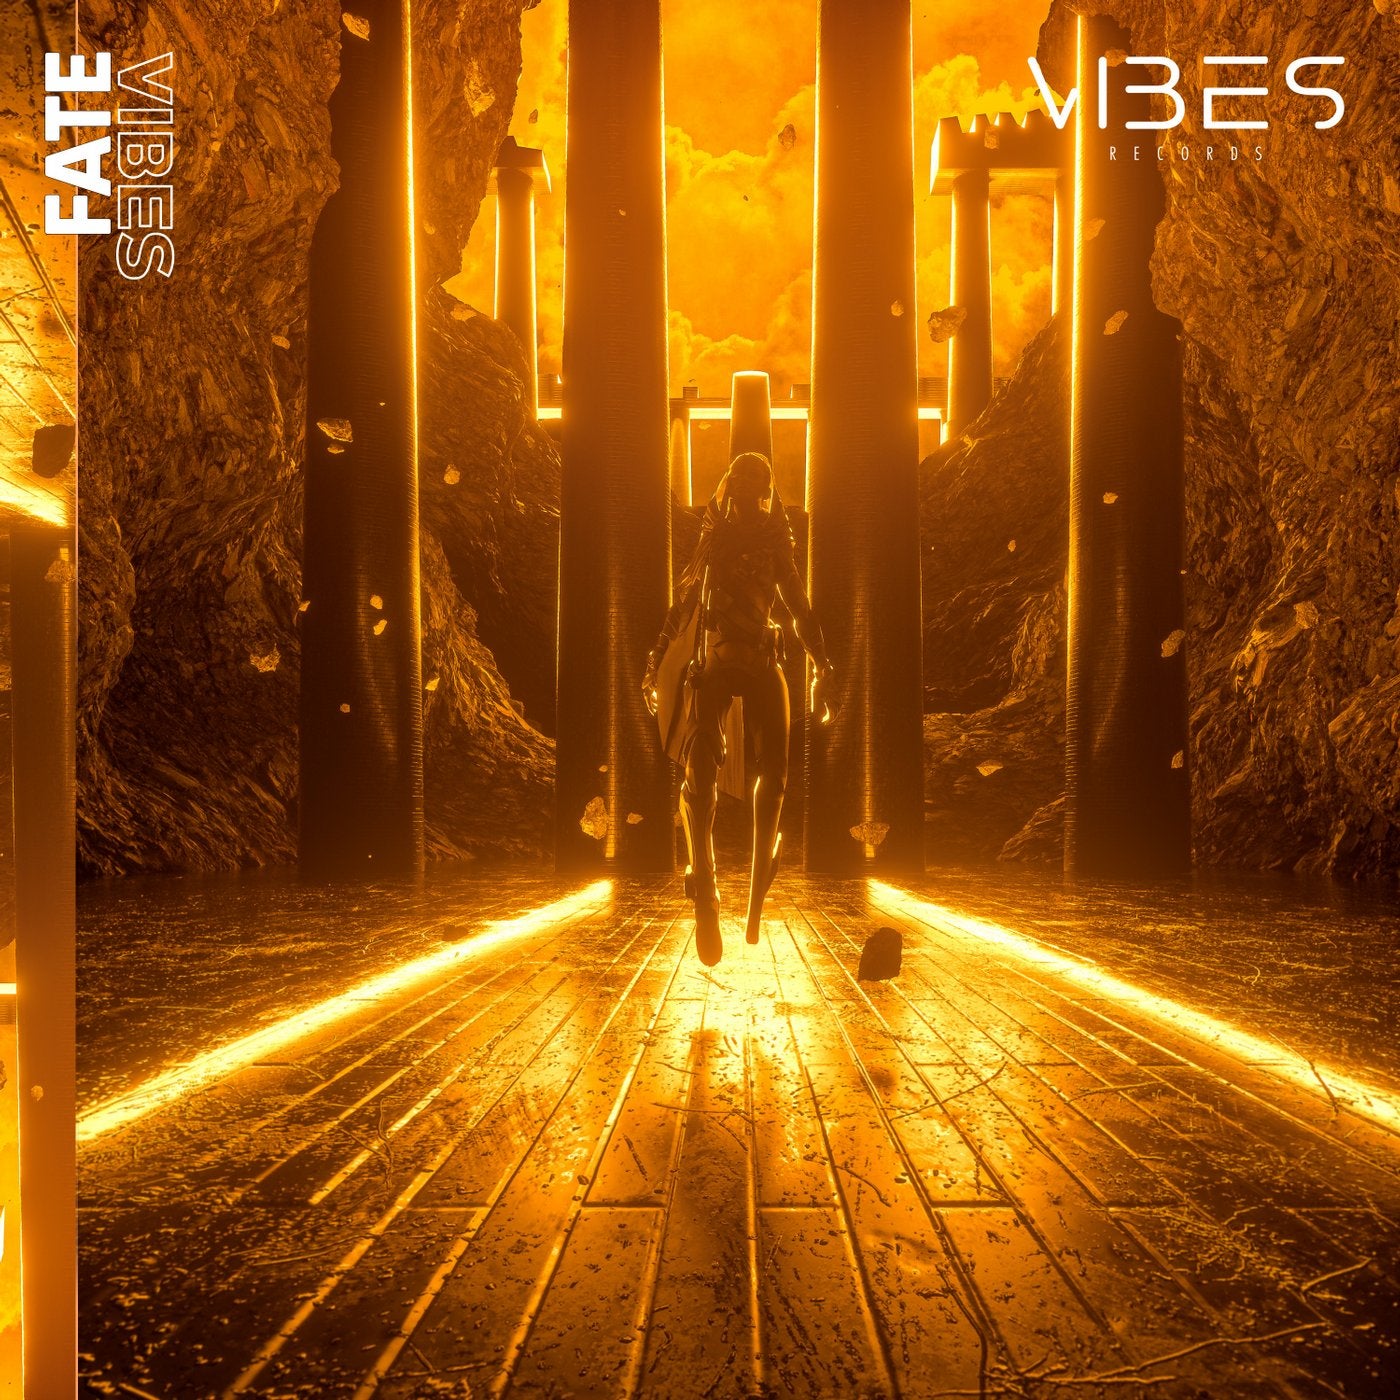 FATE: Vibes Records, Vol. 1